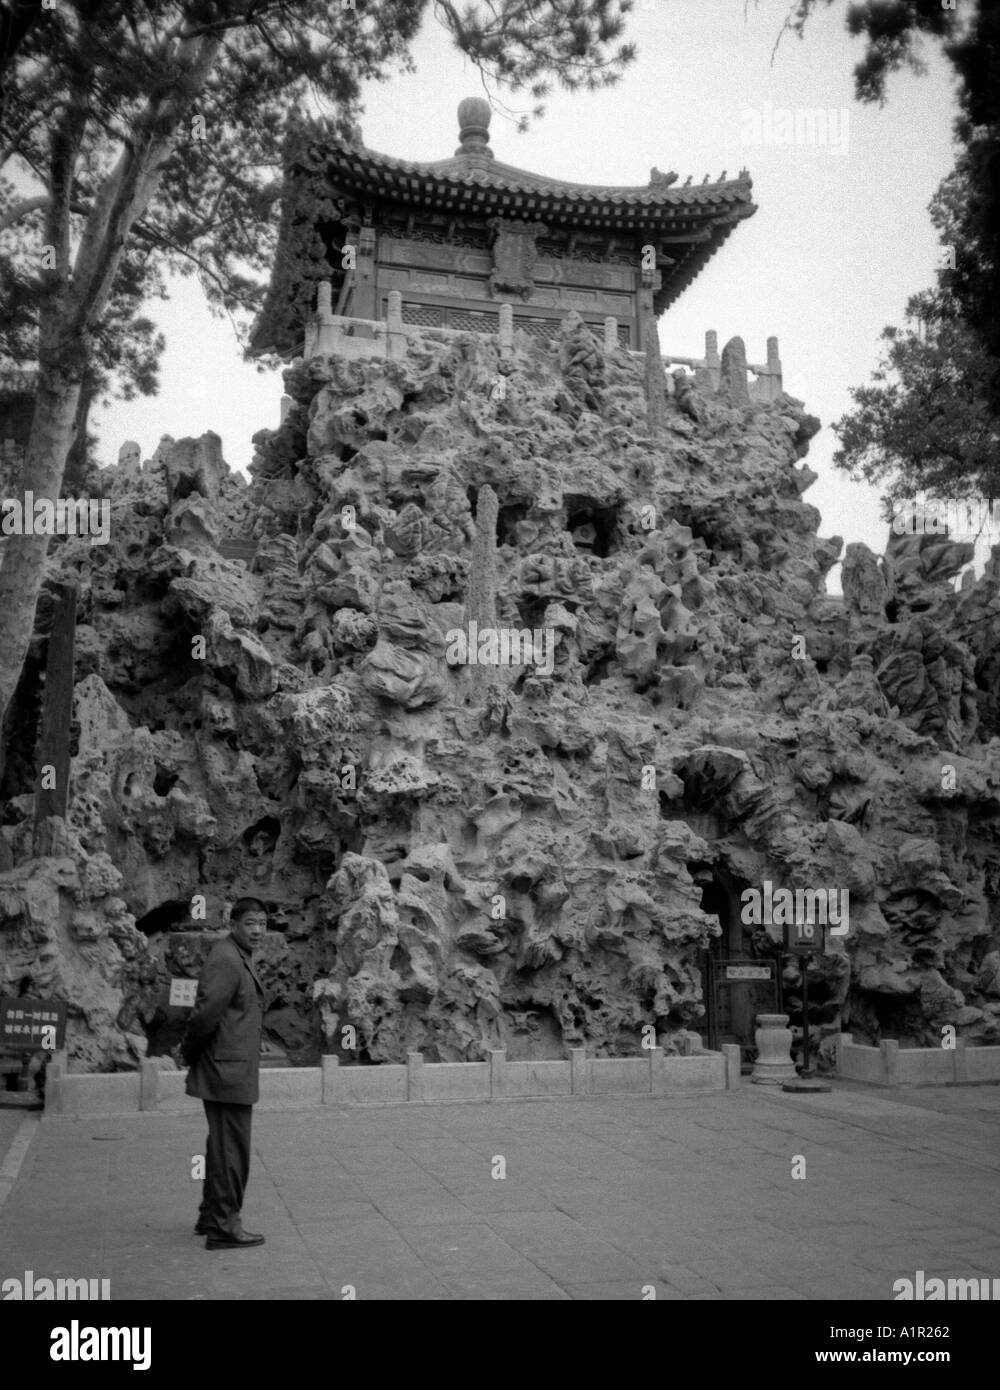 Forbidden City Imperial Palace UNESCO World Heritage Site Beijing Peking China Chinese Asian Asiatic Asia Stock Photo